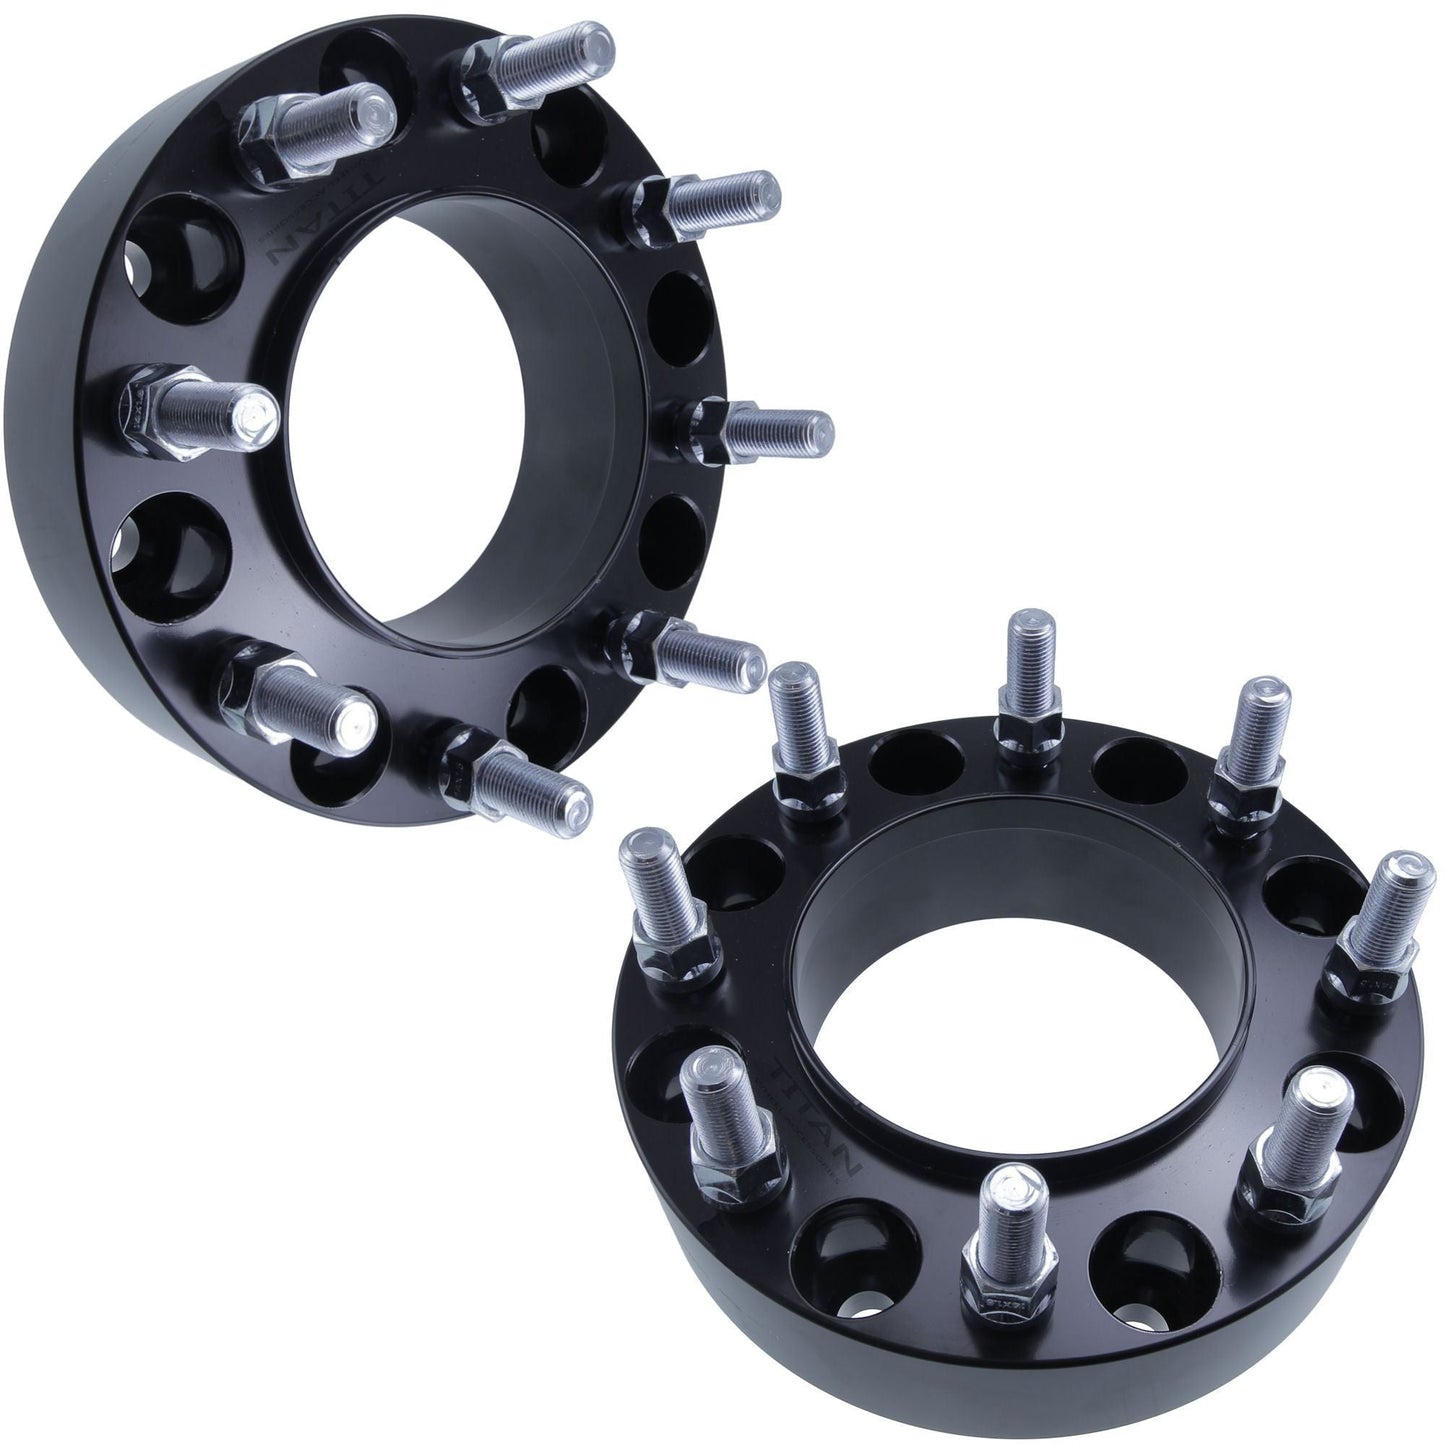 2" Titan Wheel Spacers for Ford F250 F350 | 8x170 | Hubcentric | 14x1.5 Studs | Set of 4 | Titan Wheel Accessories